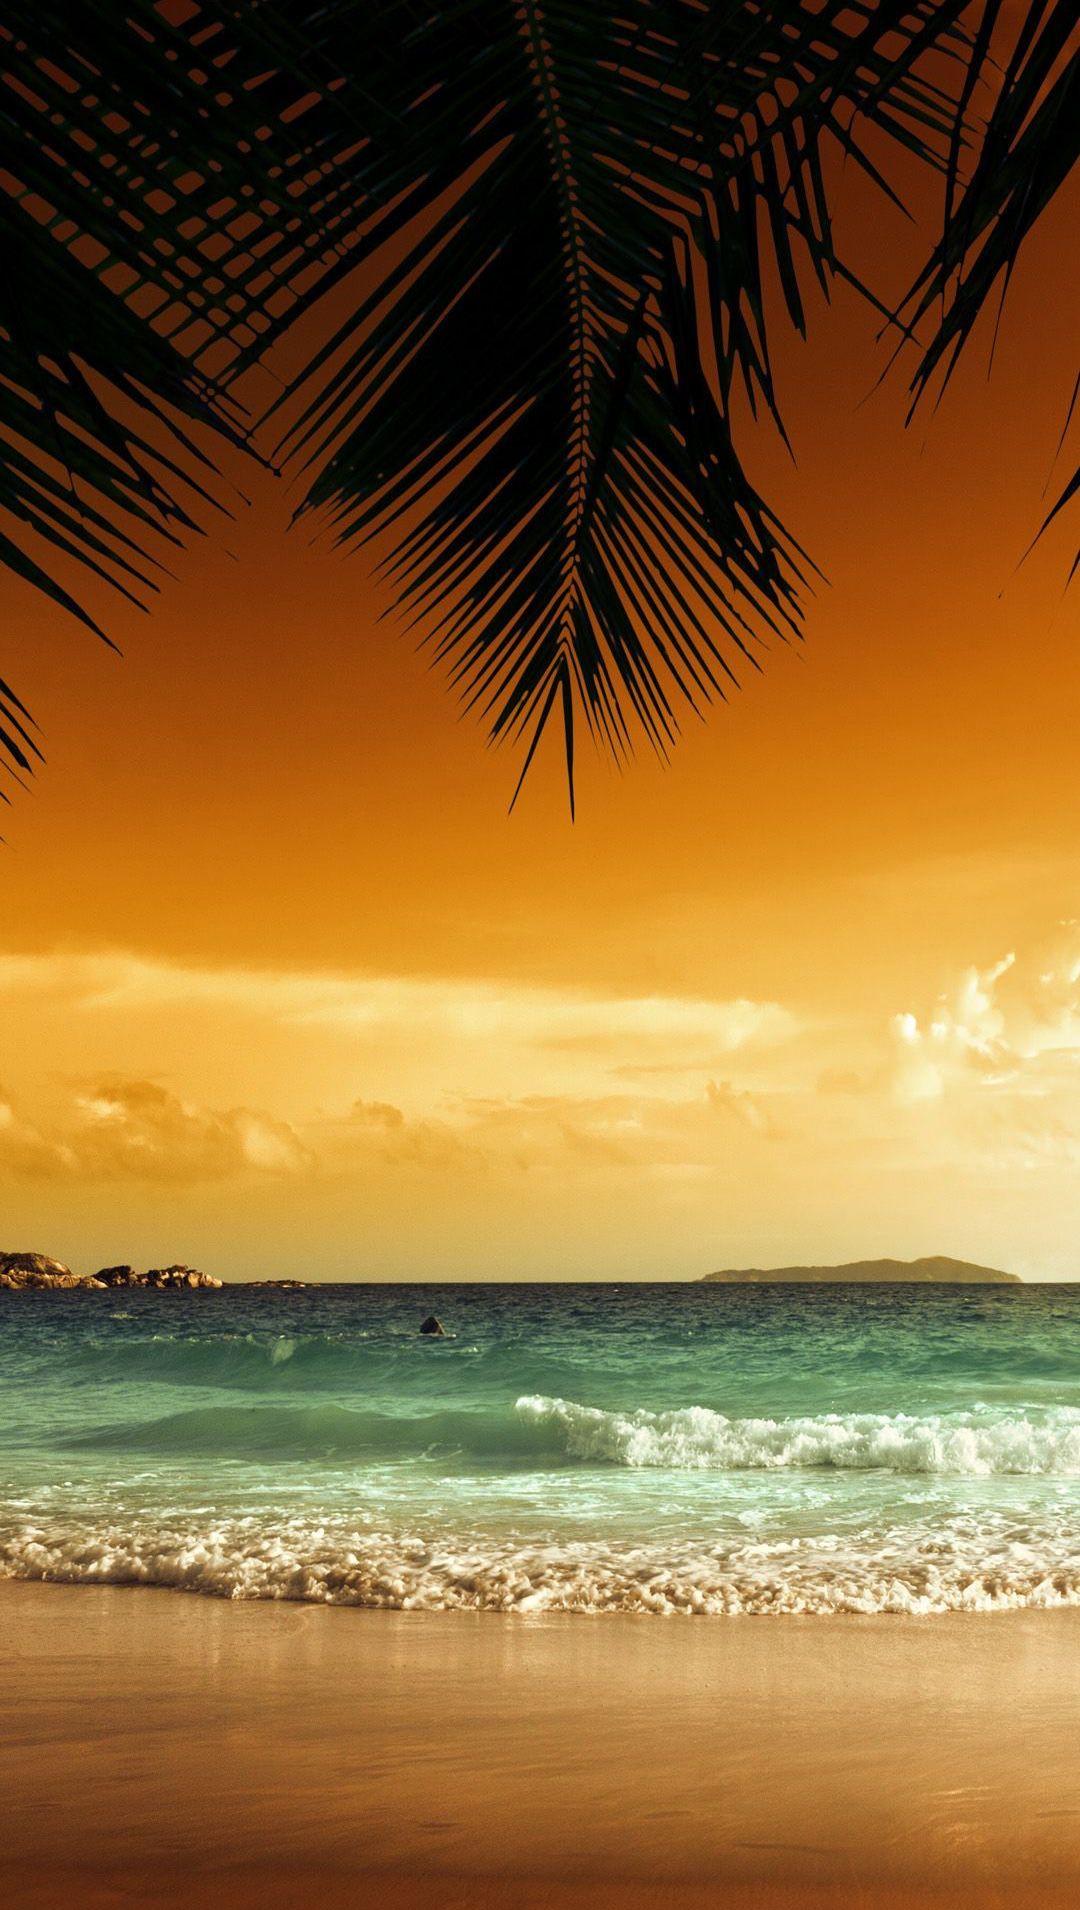 Beach For iPhone Wallpapers - Wallpaper Cave